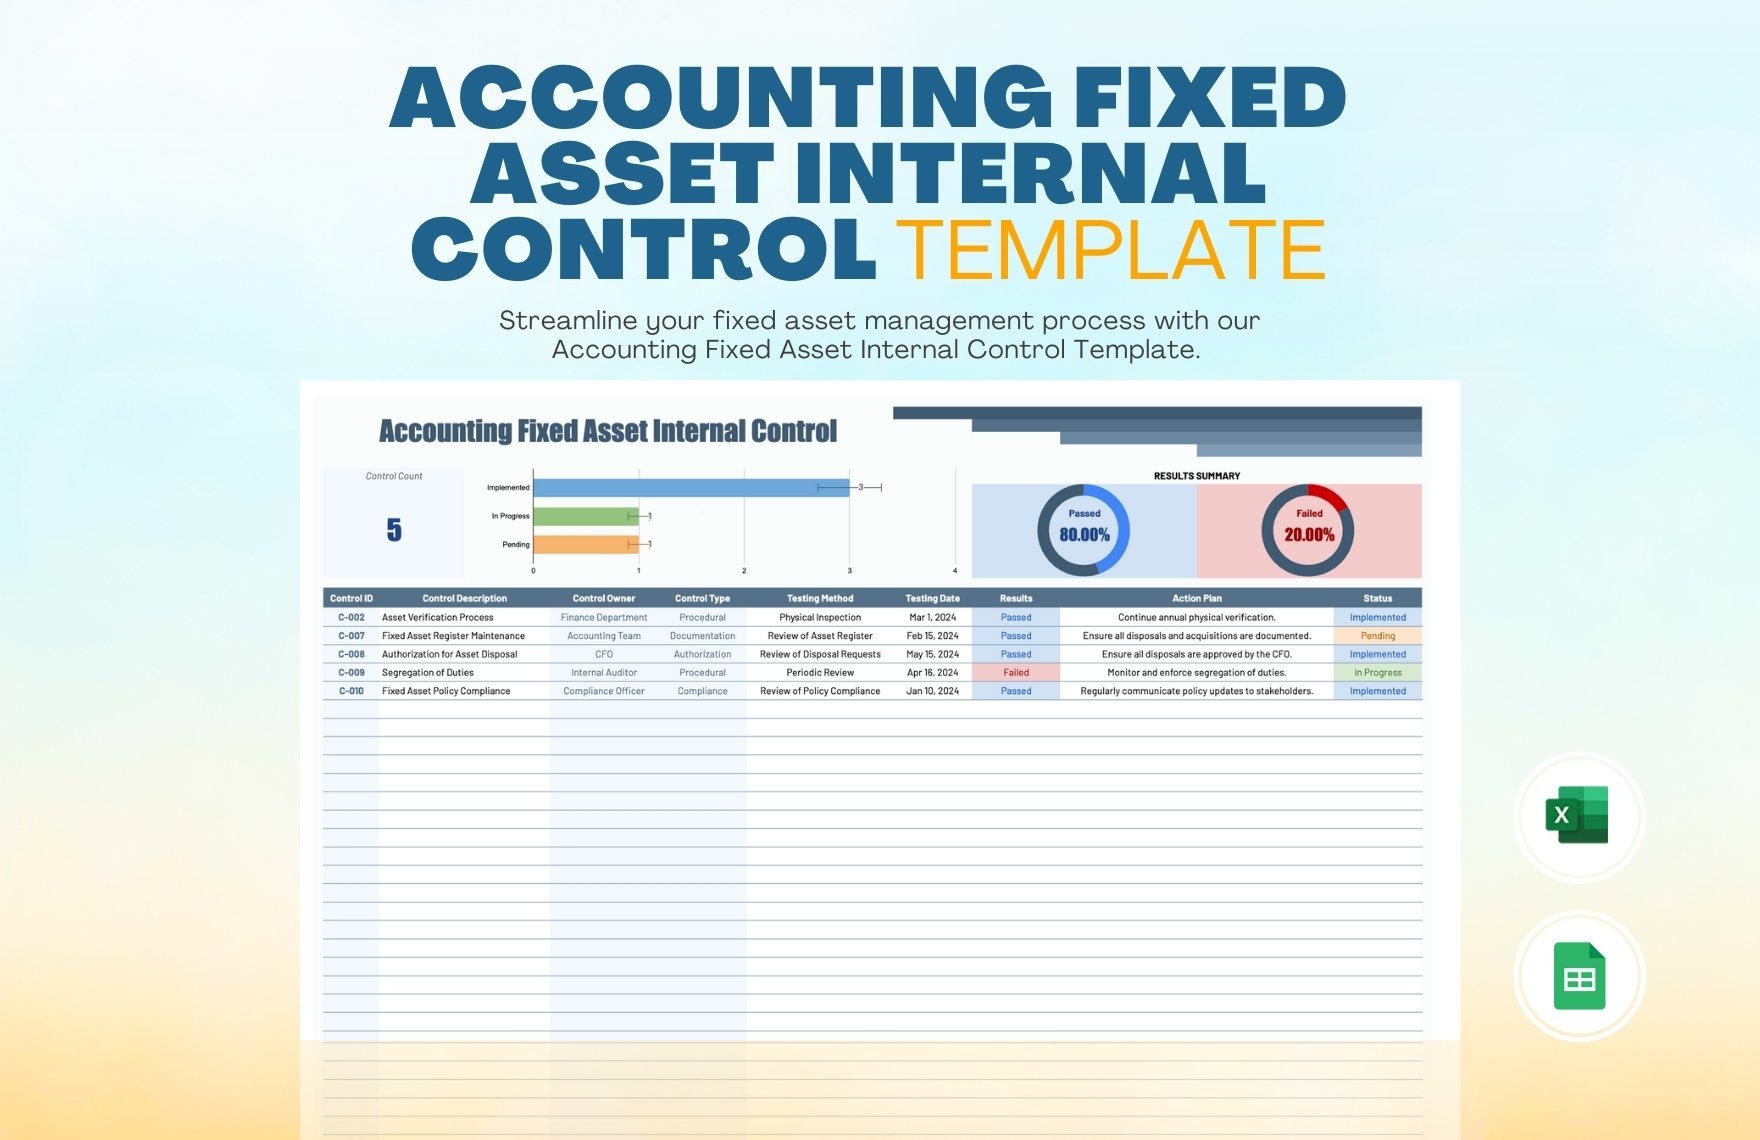 Accounting Fixed Asset Internal Control Template